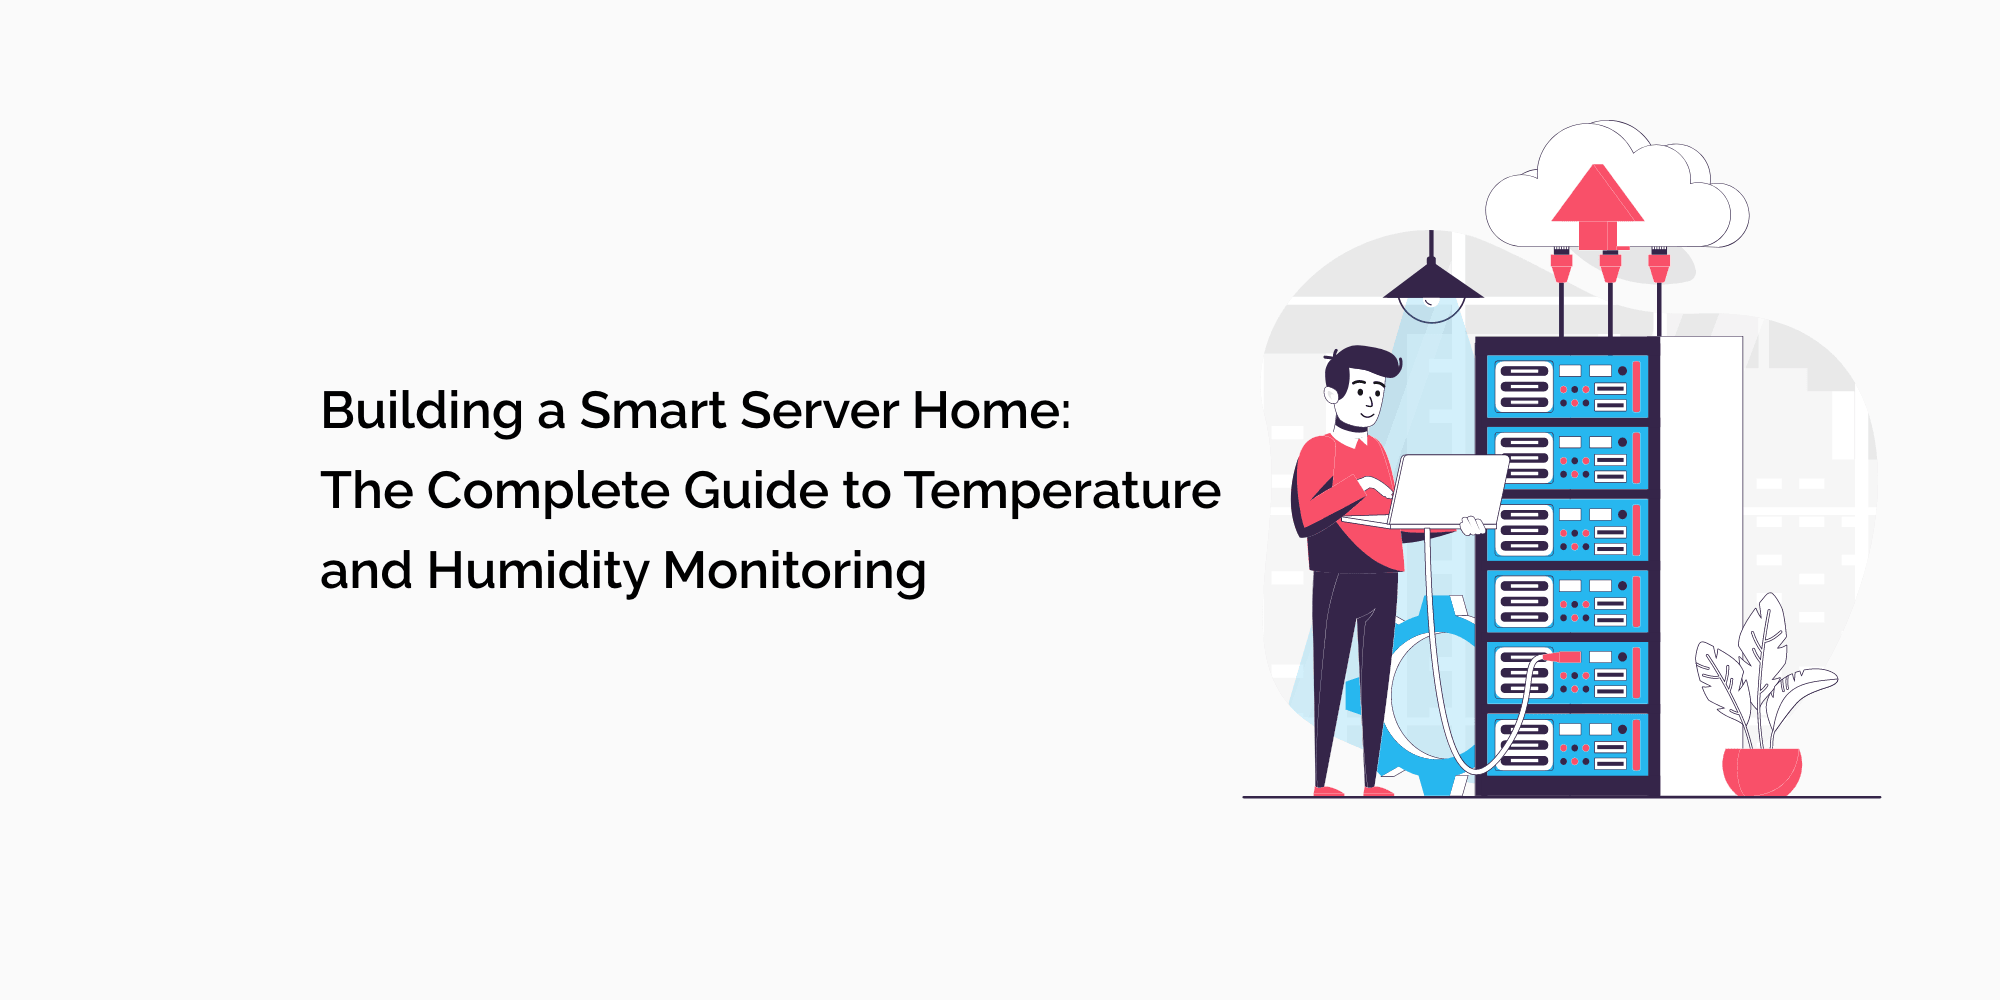 Building a Smart Server Home: The Complete Guide to Temperature and Humidity Monitoring